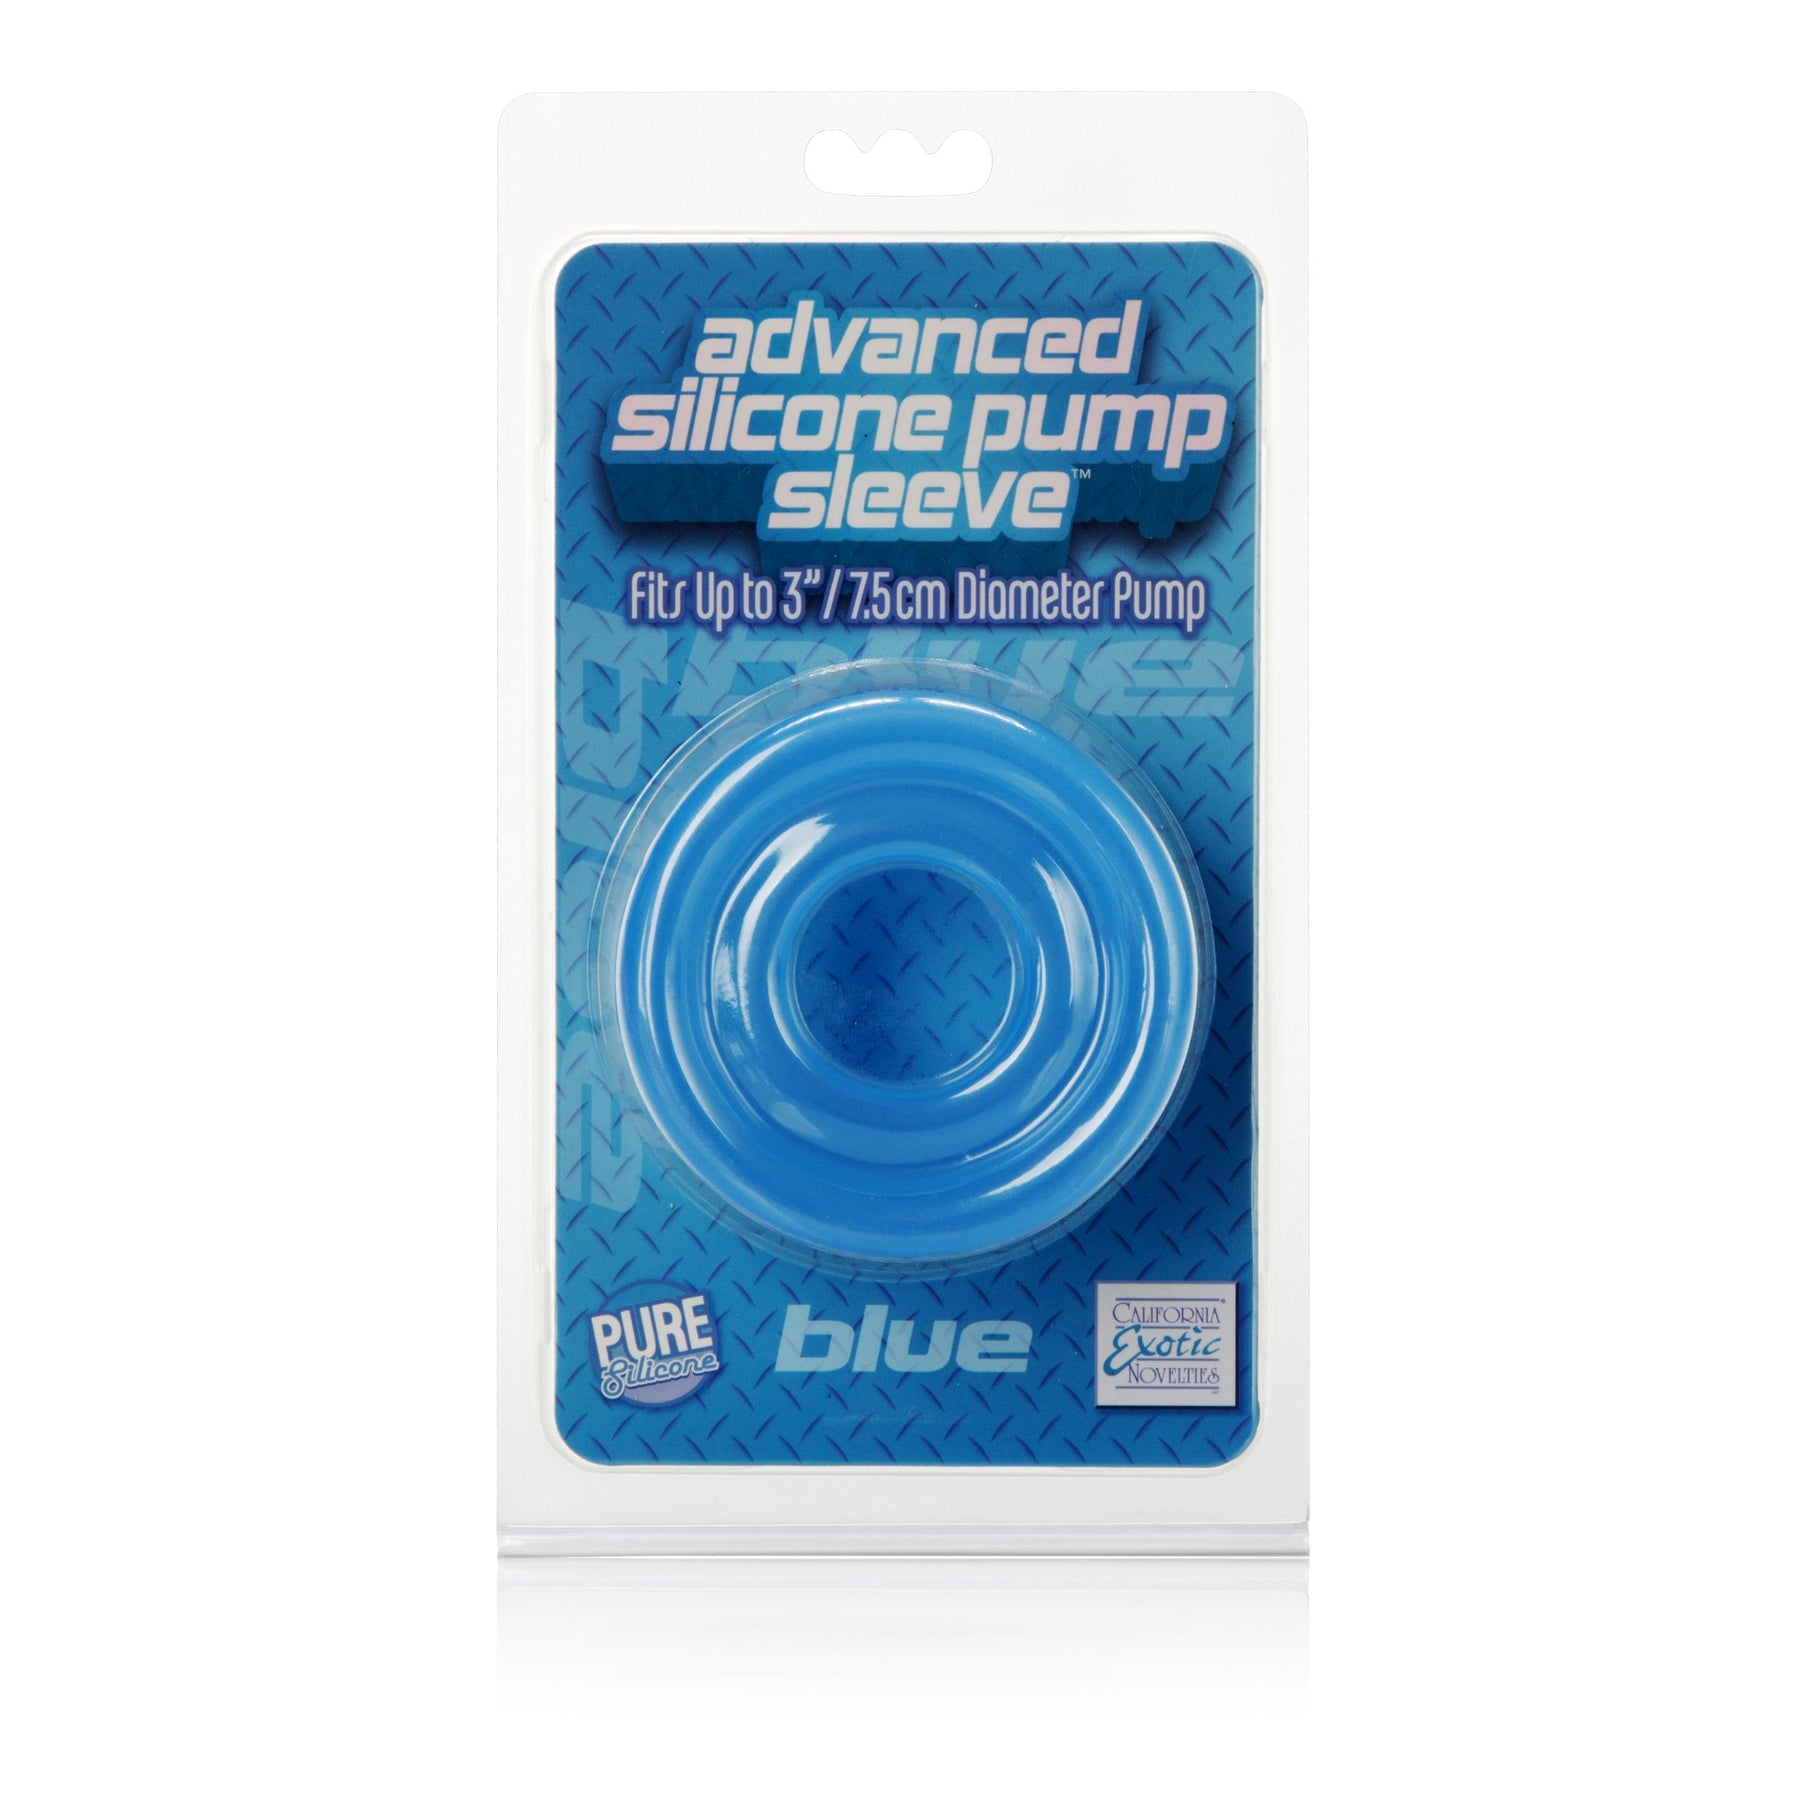 Blue silicone pump sleeve cock ring penis enlarger